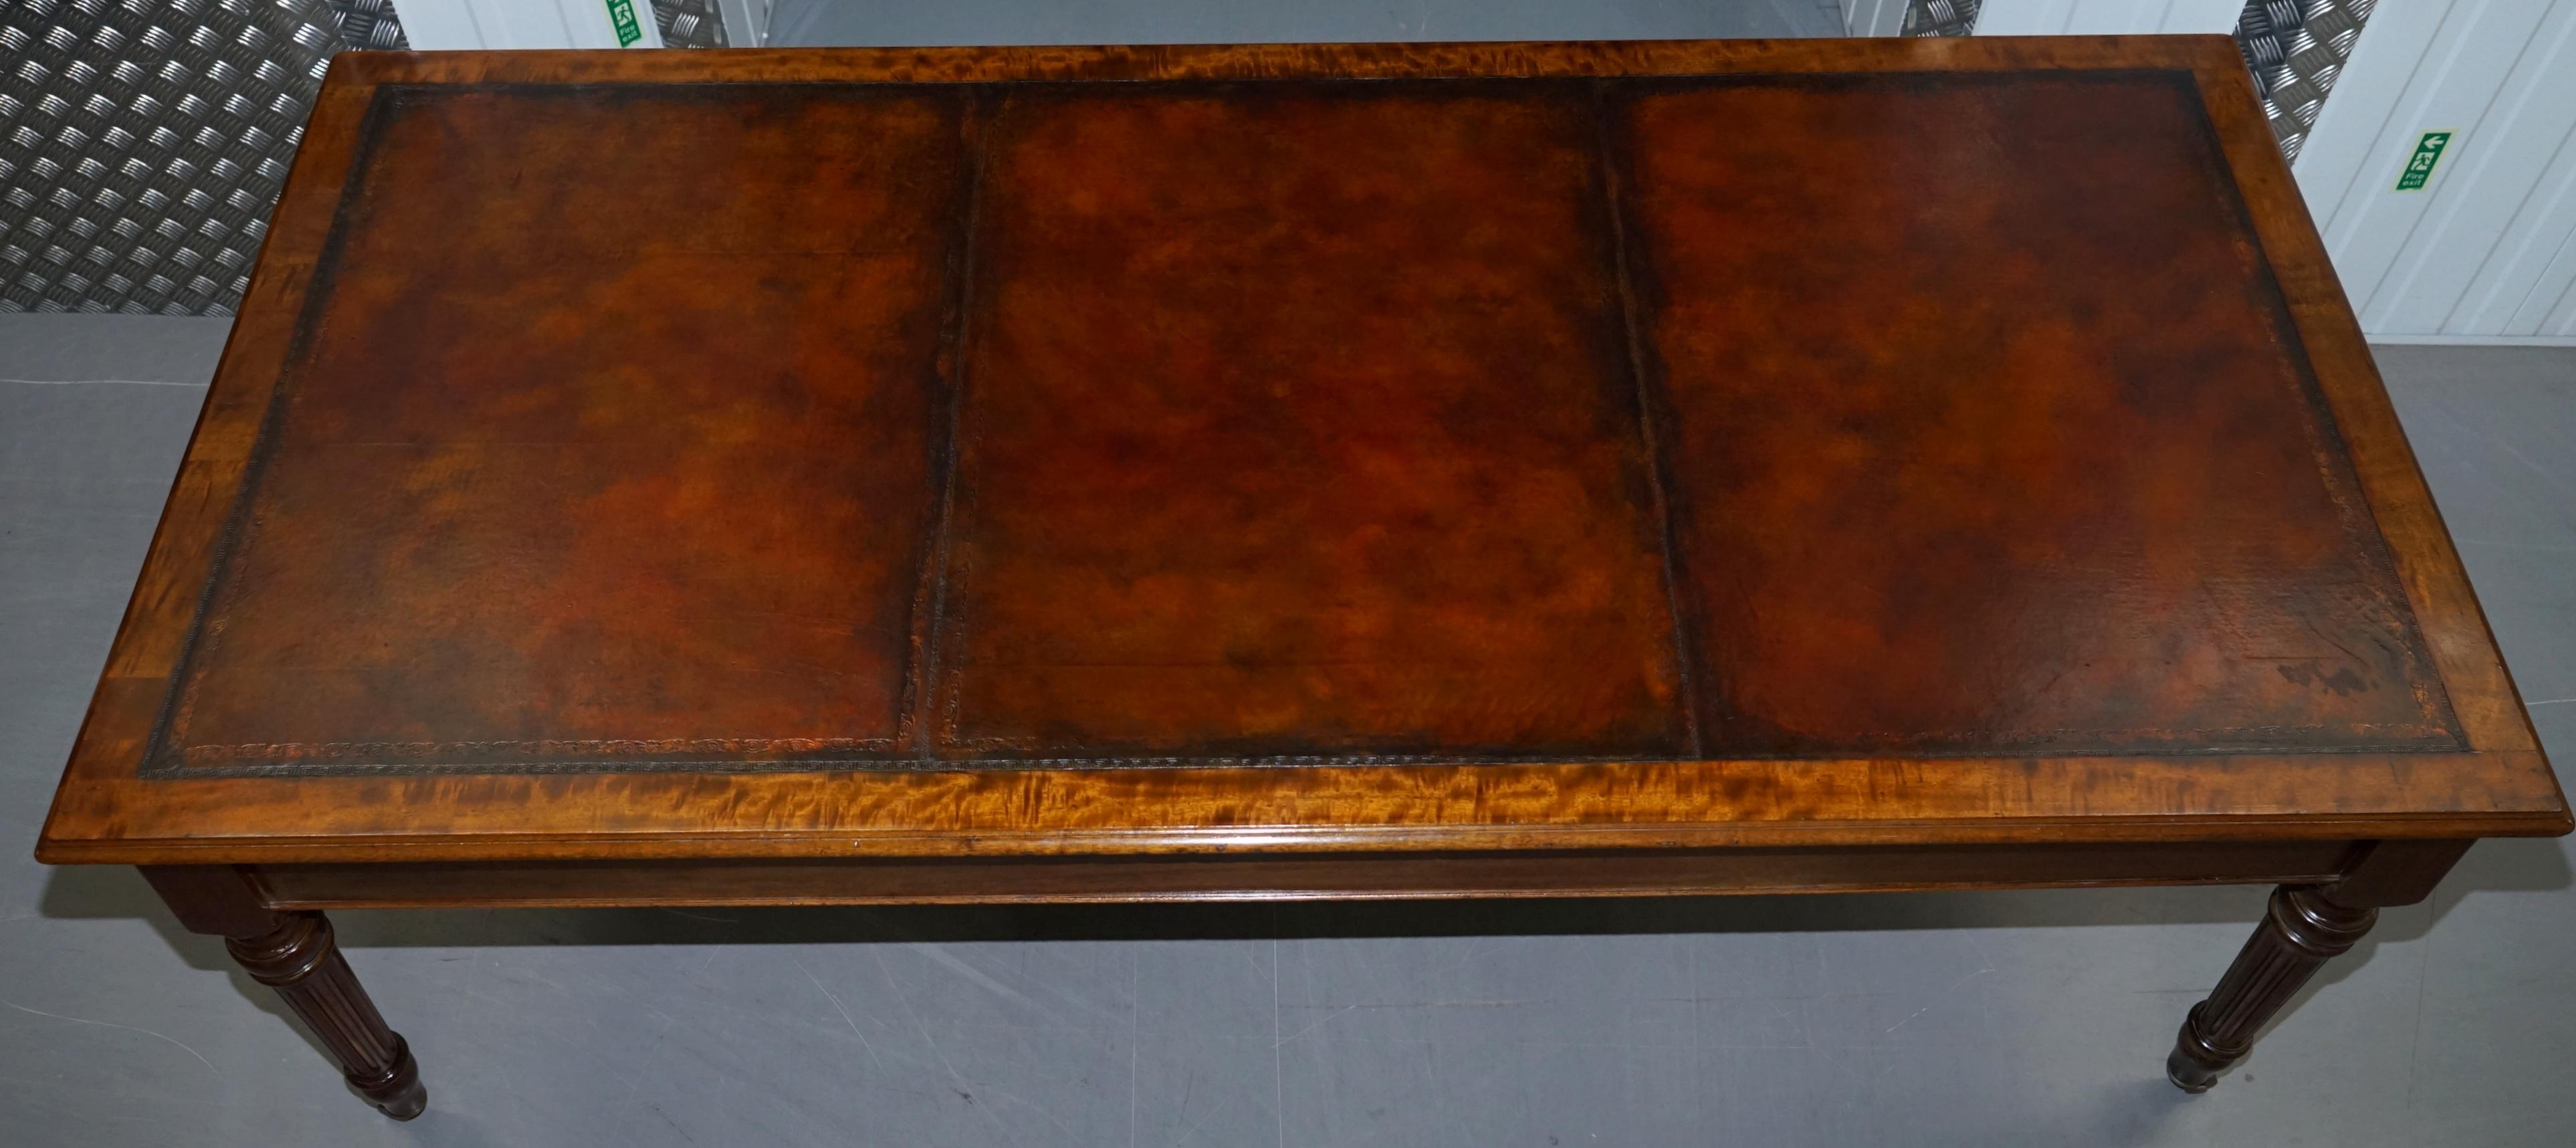 Huge Restored Victorian Refectory Library Dining Table Brown Leather Top Gillows (Englisch)